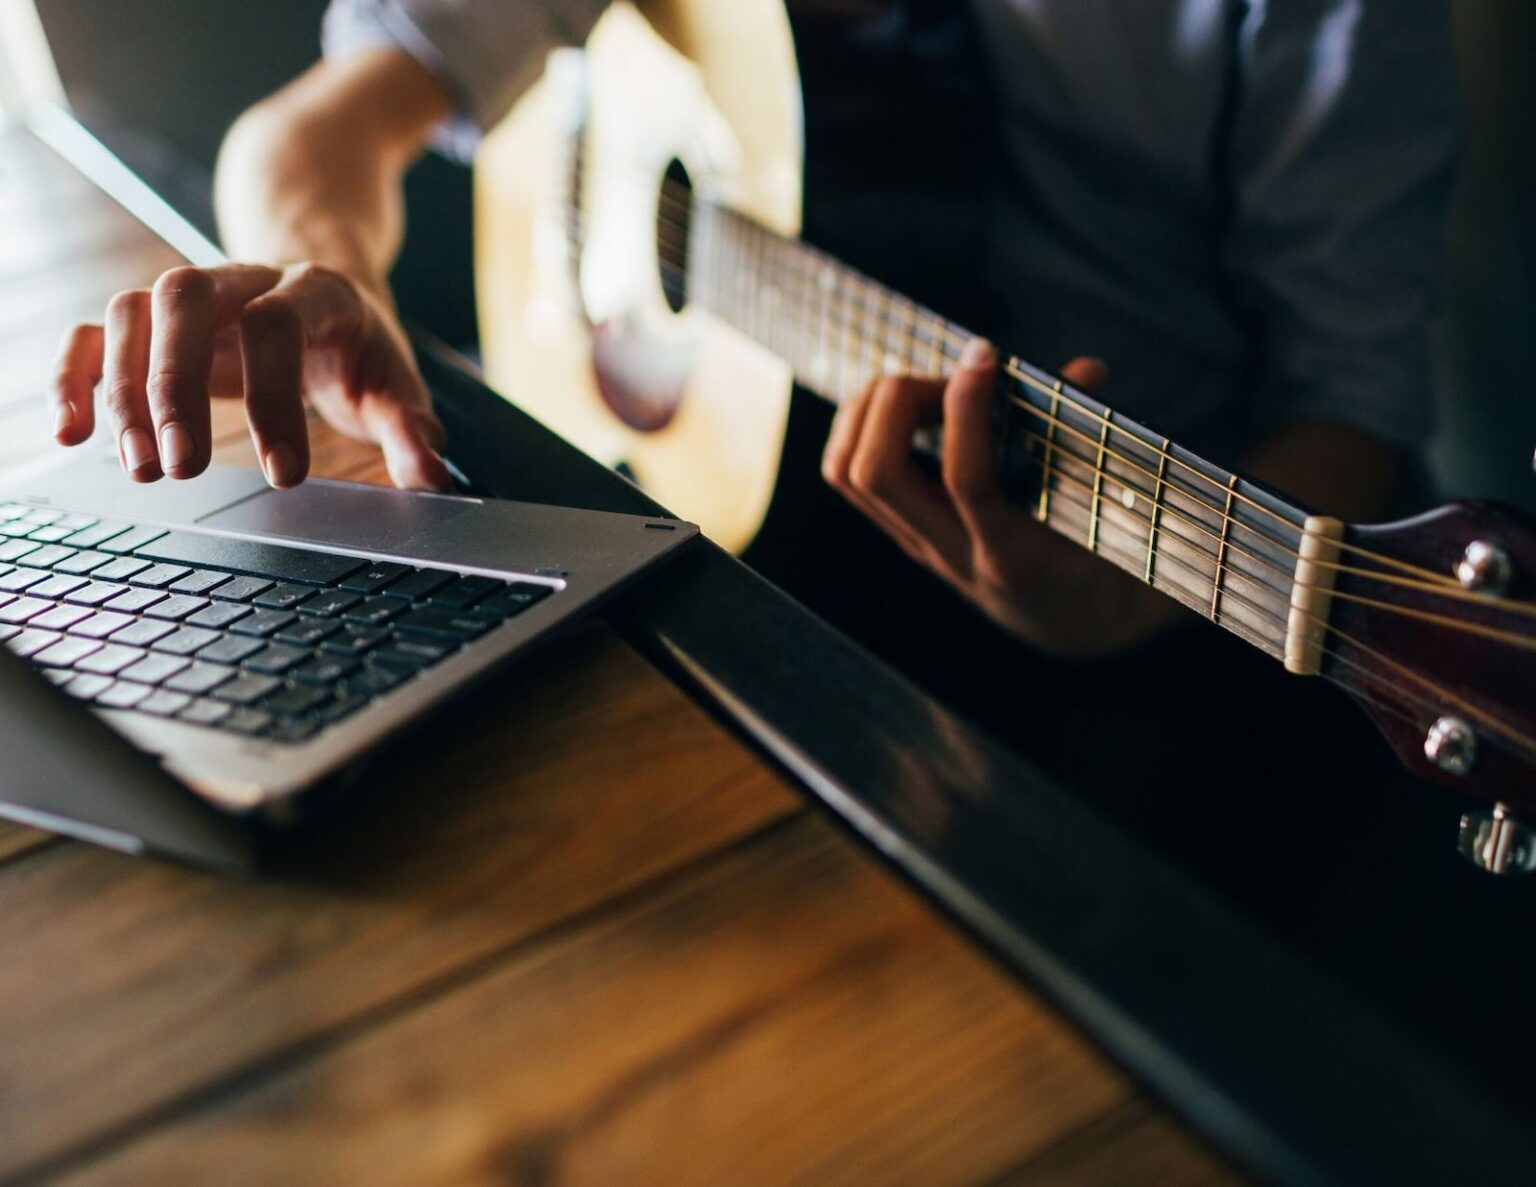 If you're still social distancing thanks to COVID, you can still make the most out of music learning. Here are four reasons you should take online classes.